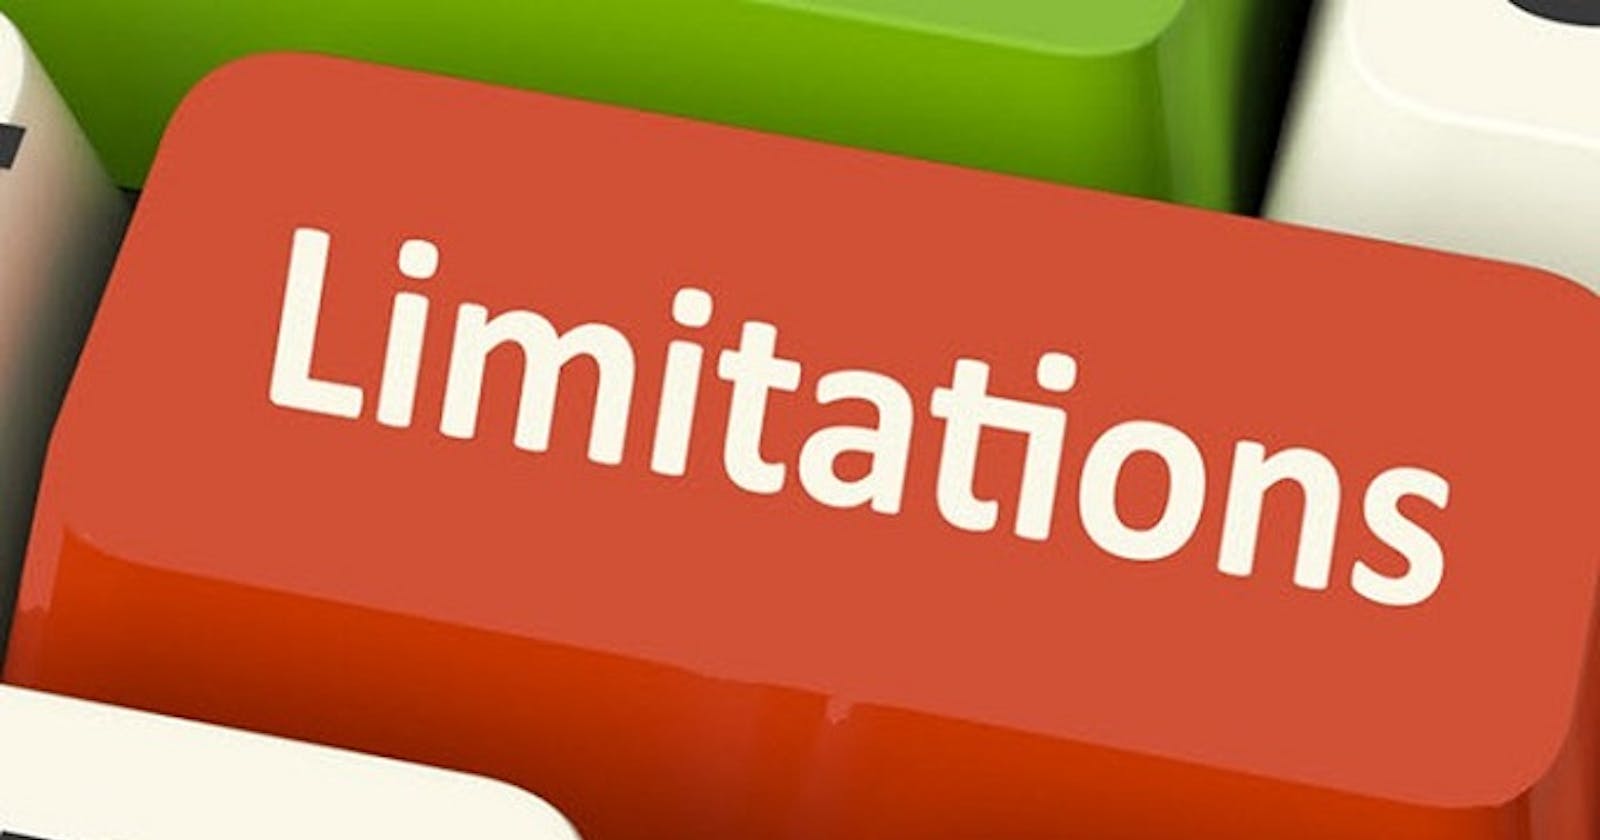 The only limitation is YOU!